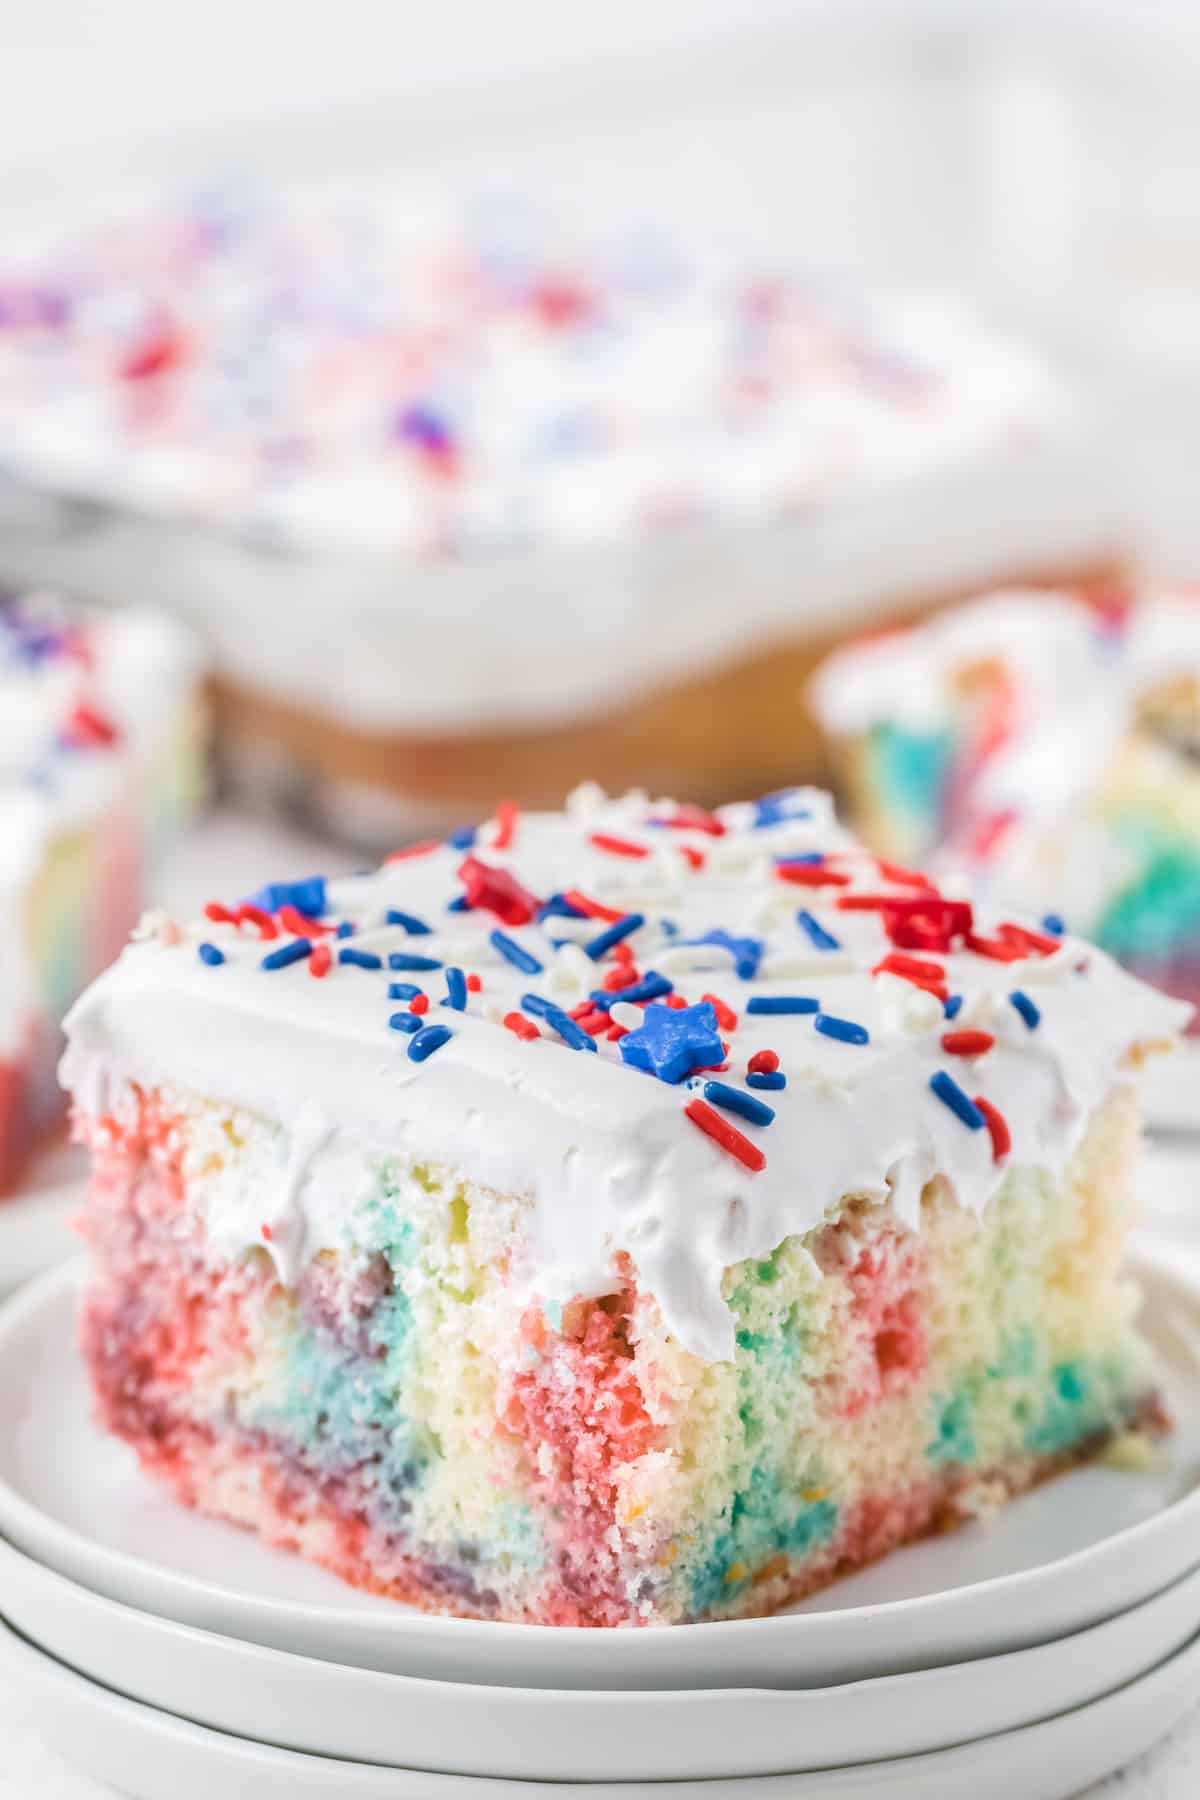 A close up of a piece of cake on a plate, with Sprinkles and red and blue streaks